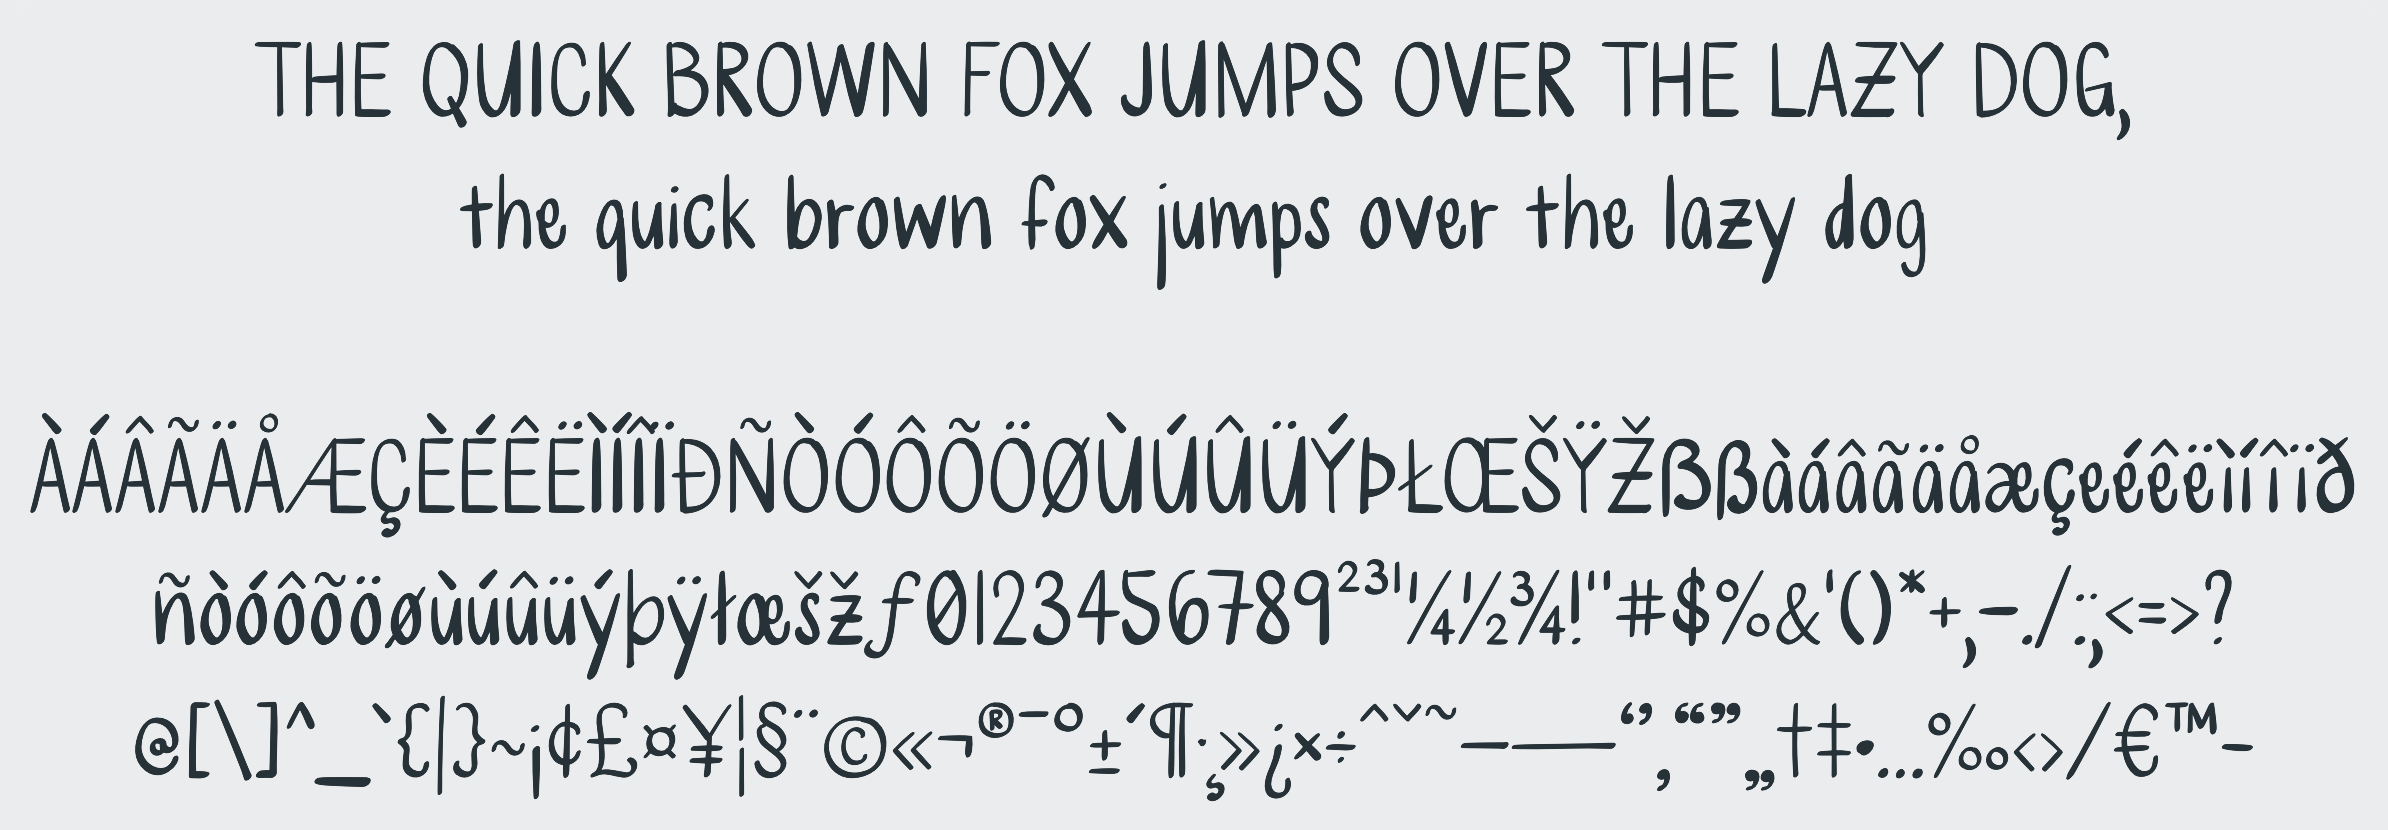 A sample of my handwriting as a font, including the pangram “The quick brown fox jumps over the lazy dog” in both uppercase and lowercase letters, as well as Latin characters and symbols.